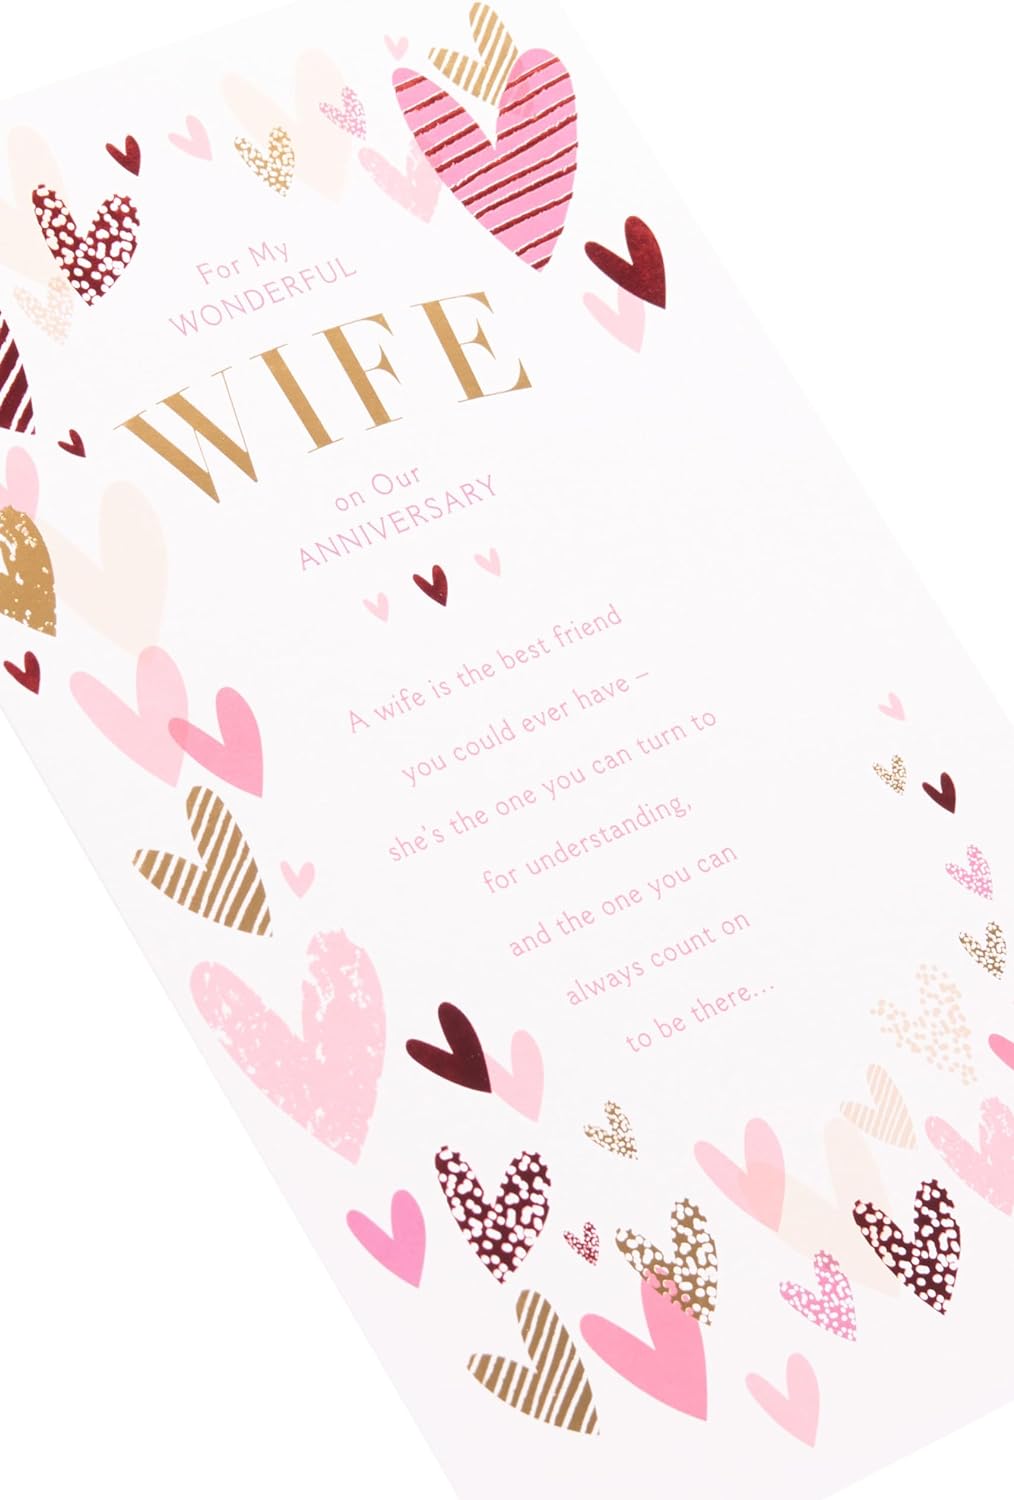 Pink & Gold Hearts Design Wife Anniversary Card